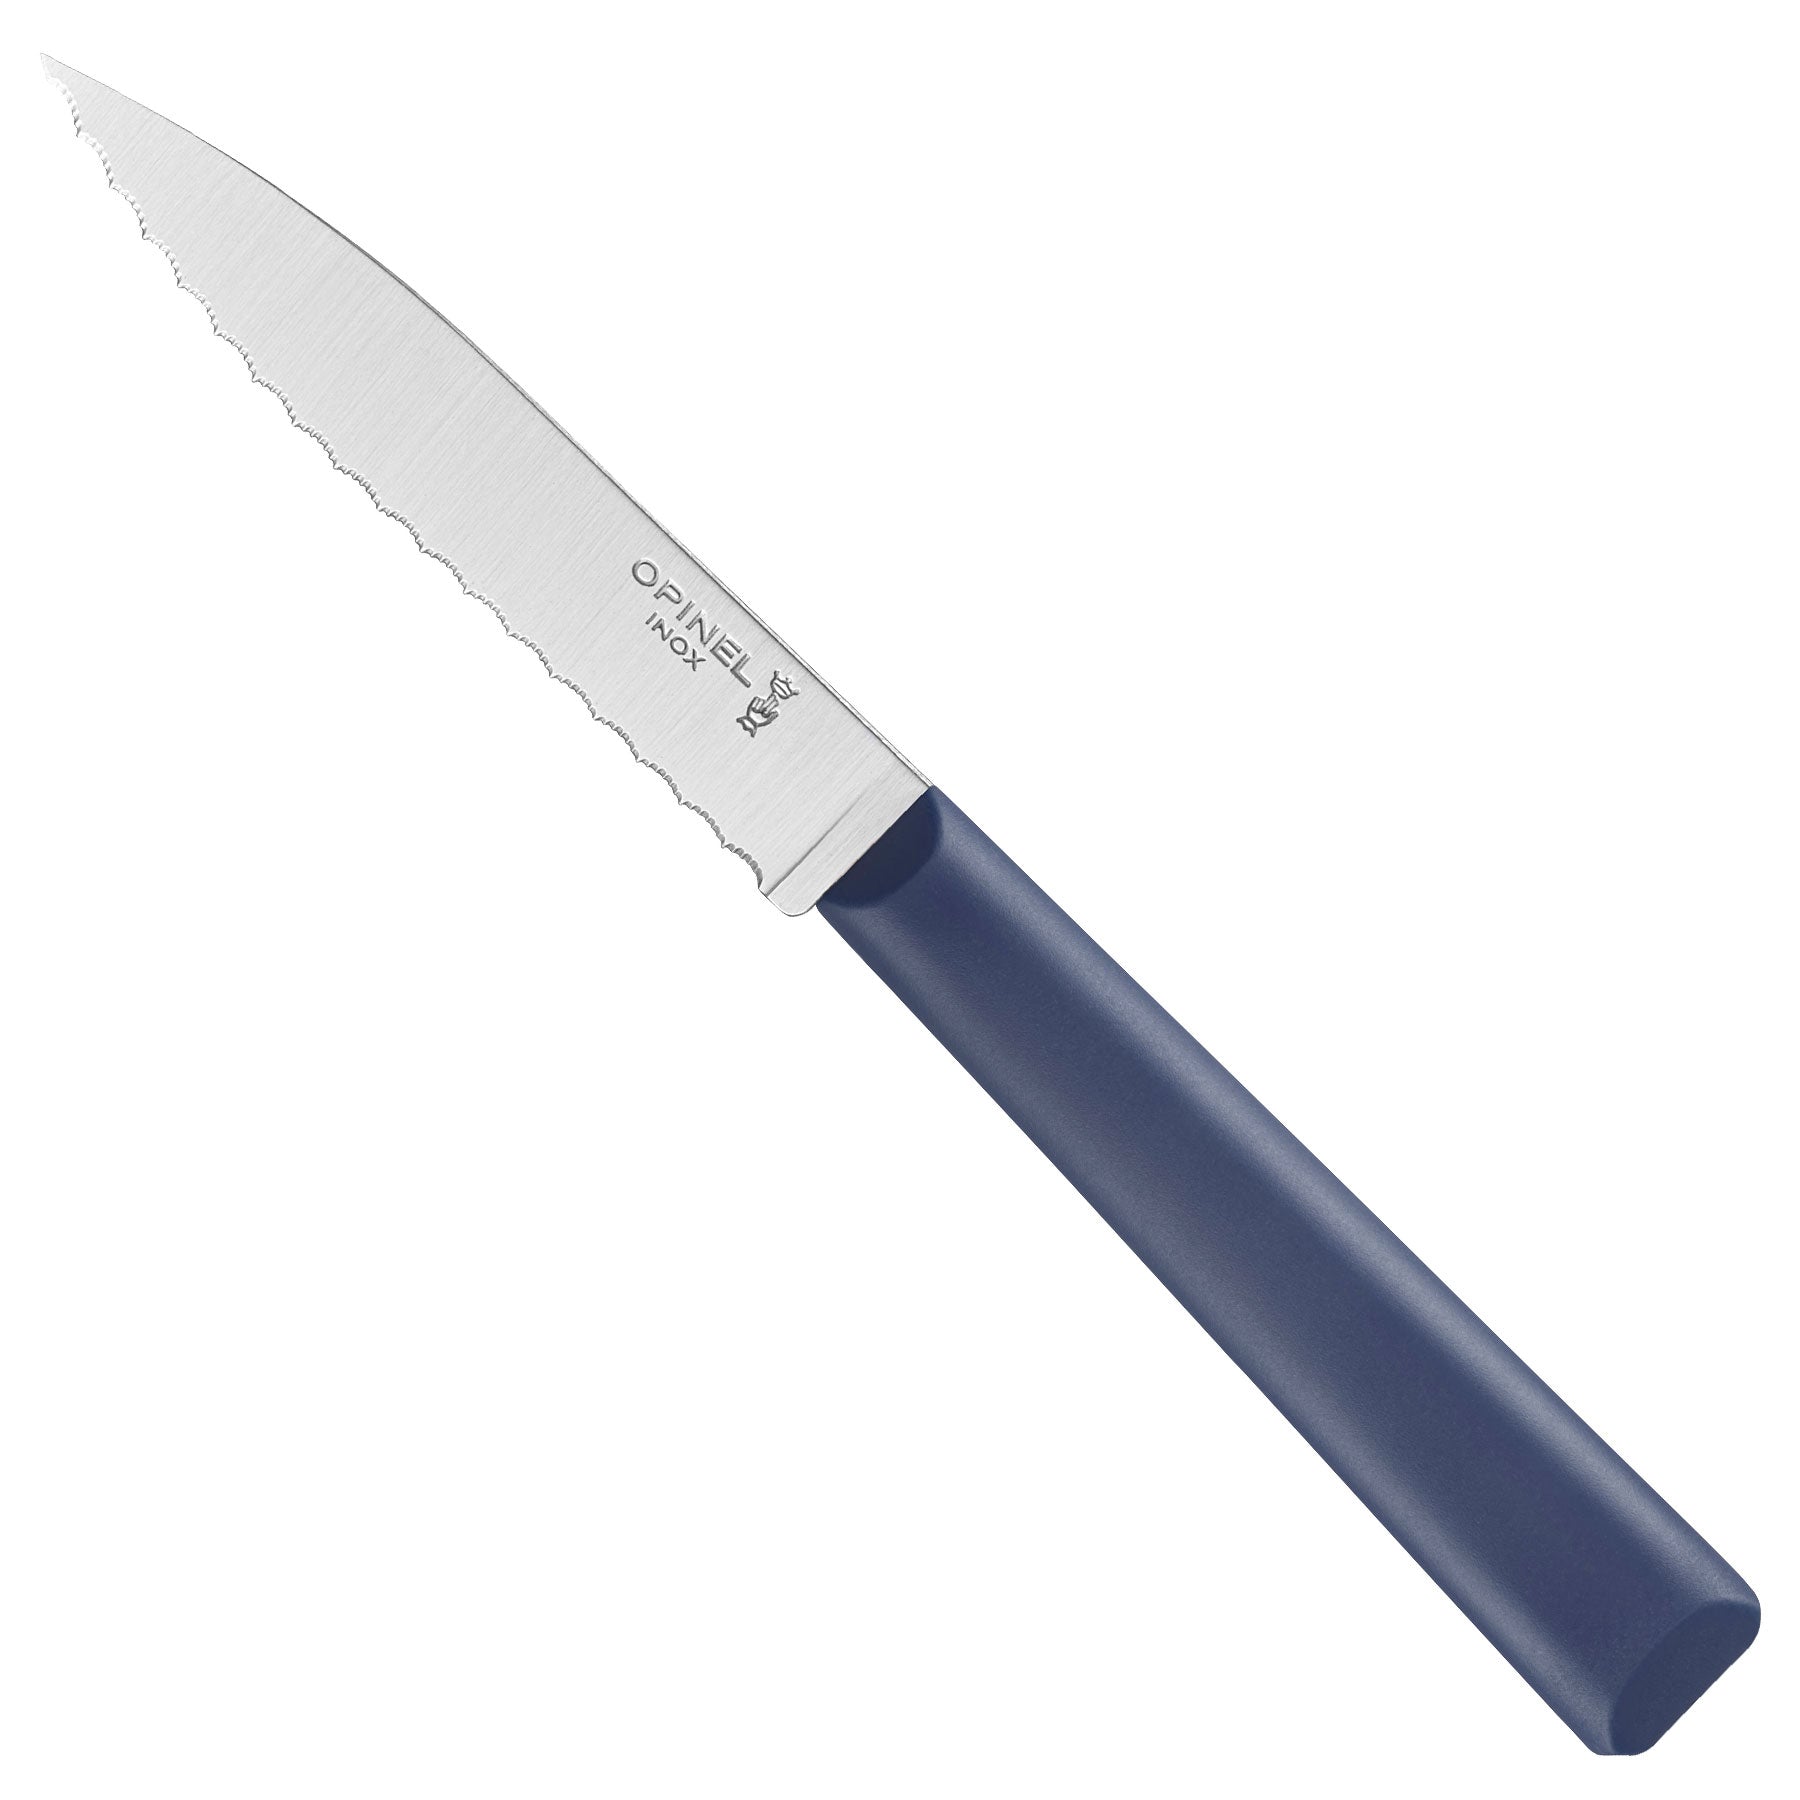 Why You Need a Serrated Knife in Your Kitchen - Made In